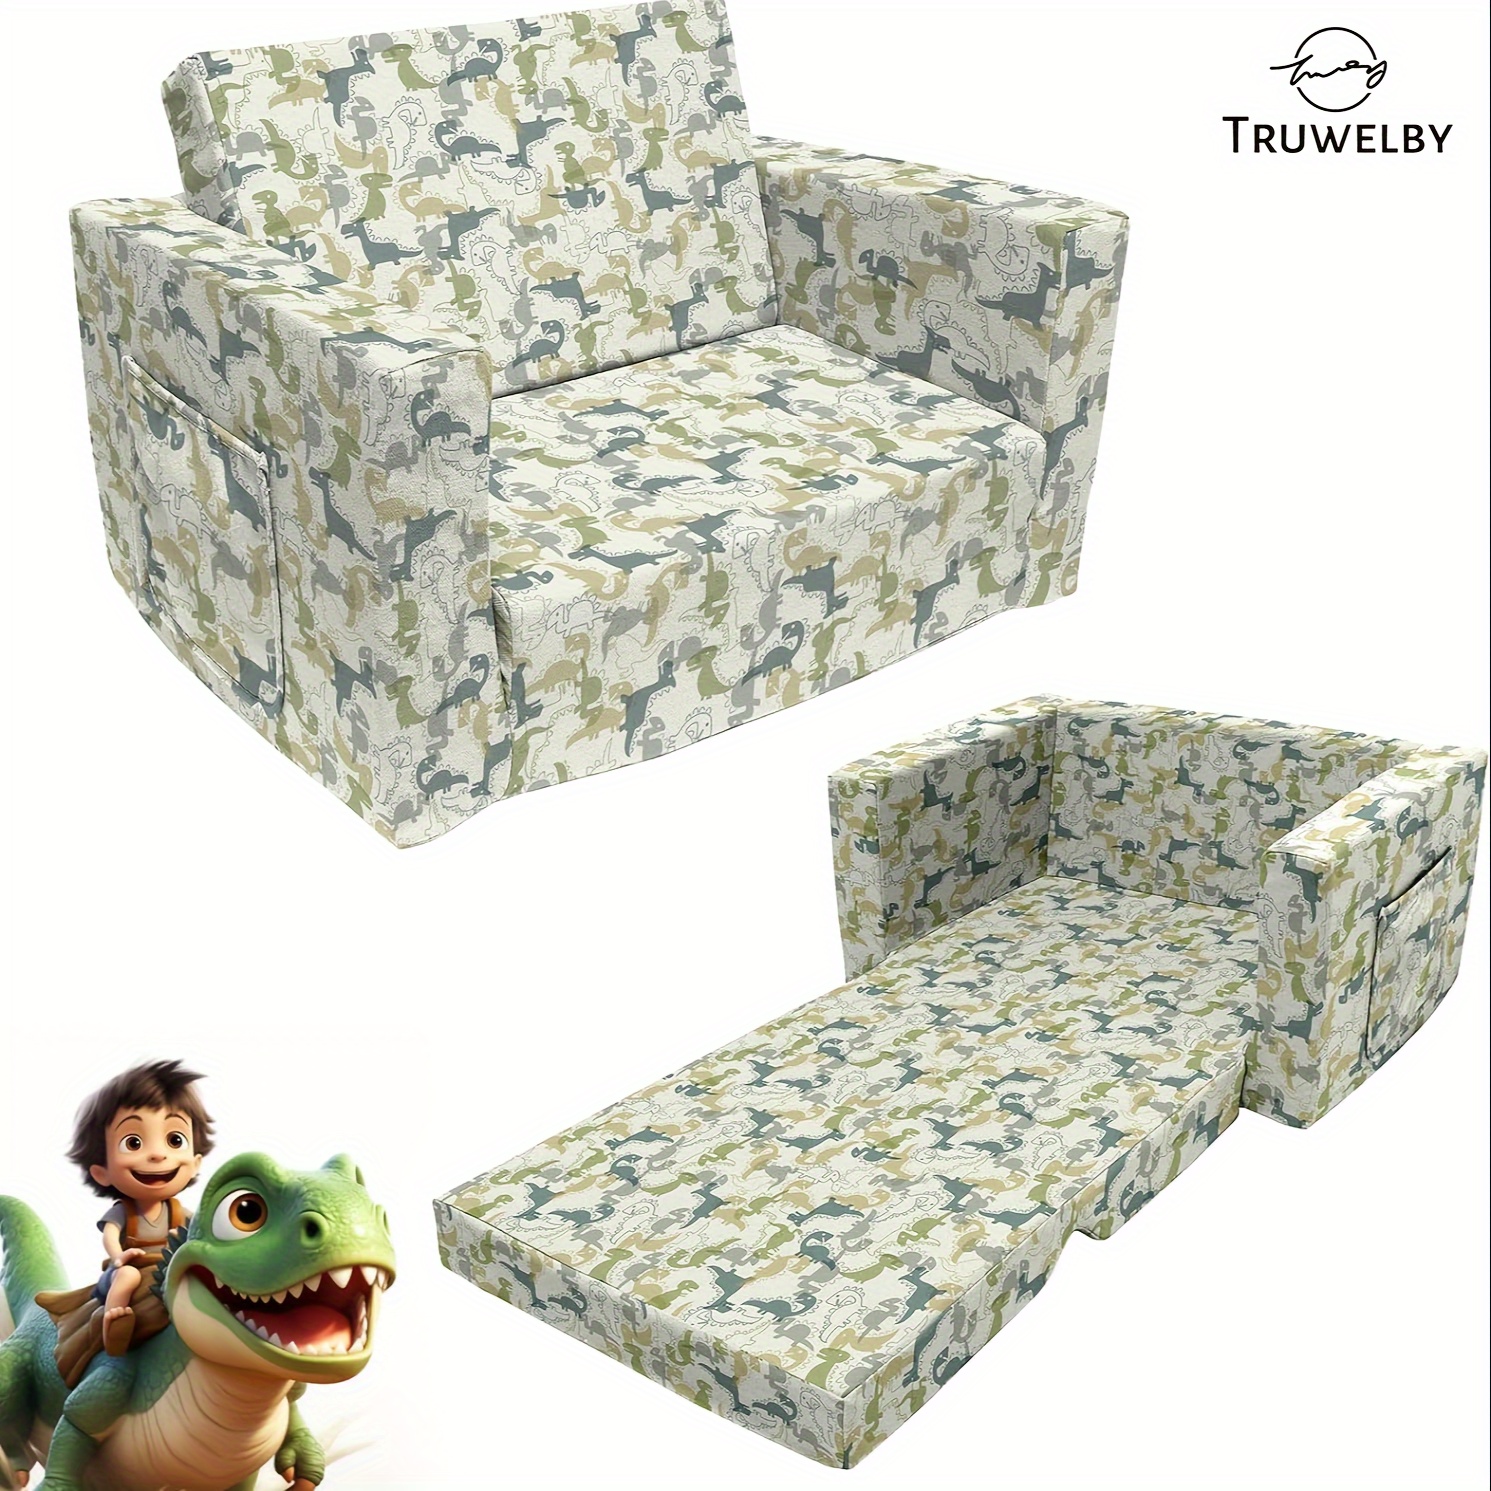 

Truwelby Toddler Couch Kids Sofa Children's 2 In 1 Convertible Sofa To Lounger Toddler Chairs For Boys Girls Couch Bed - Extra Soft Flip Open Chair & Sleeper